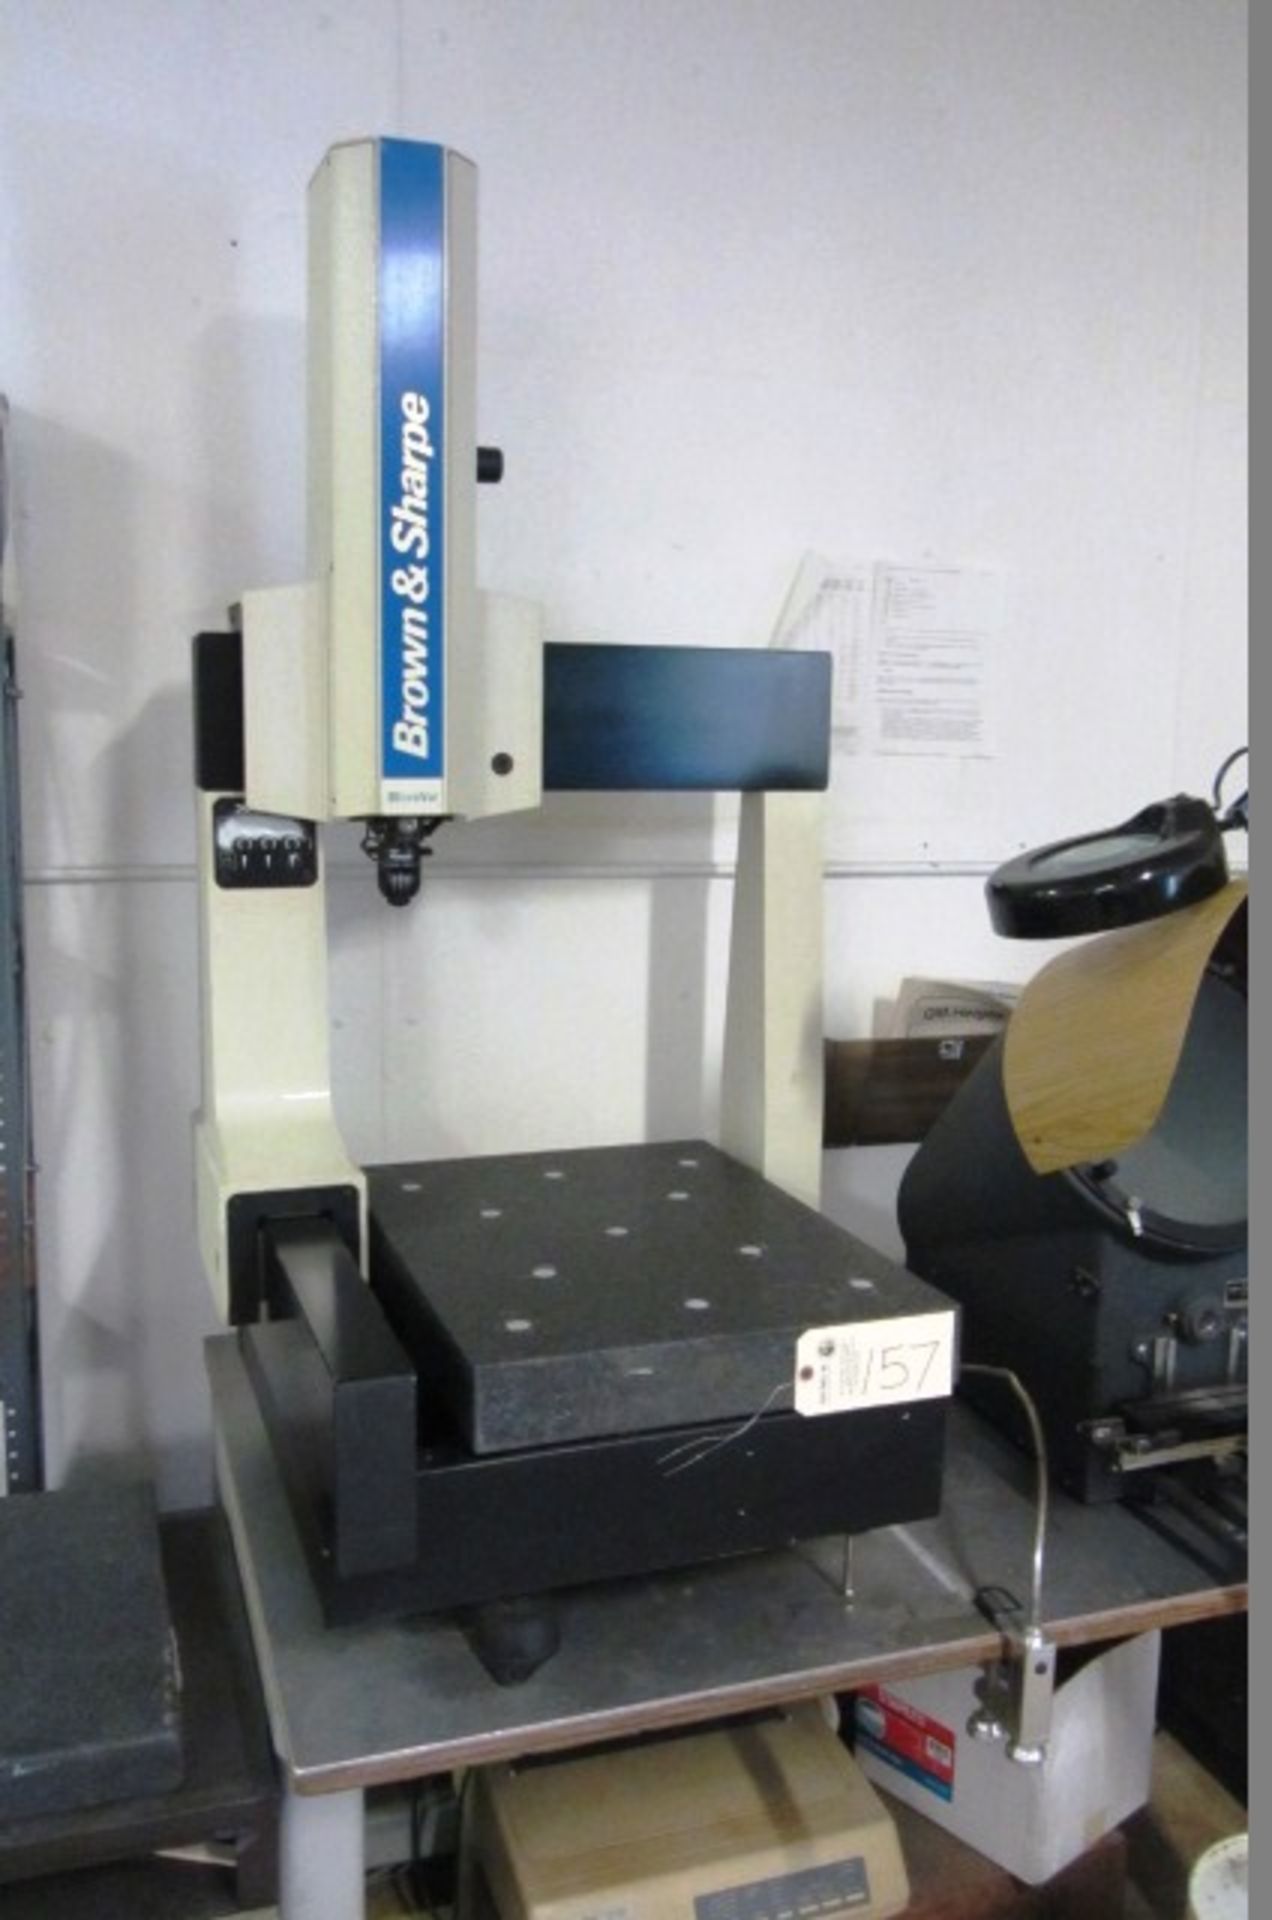 Brown & Sharpe Microval Coordinate Measuring Machine with 20'' L x 16'' W x 12'' H Capacity, MIP